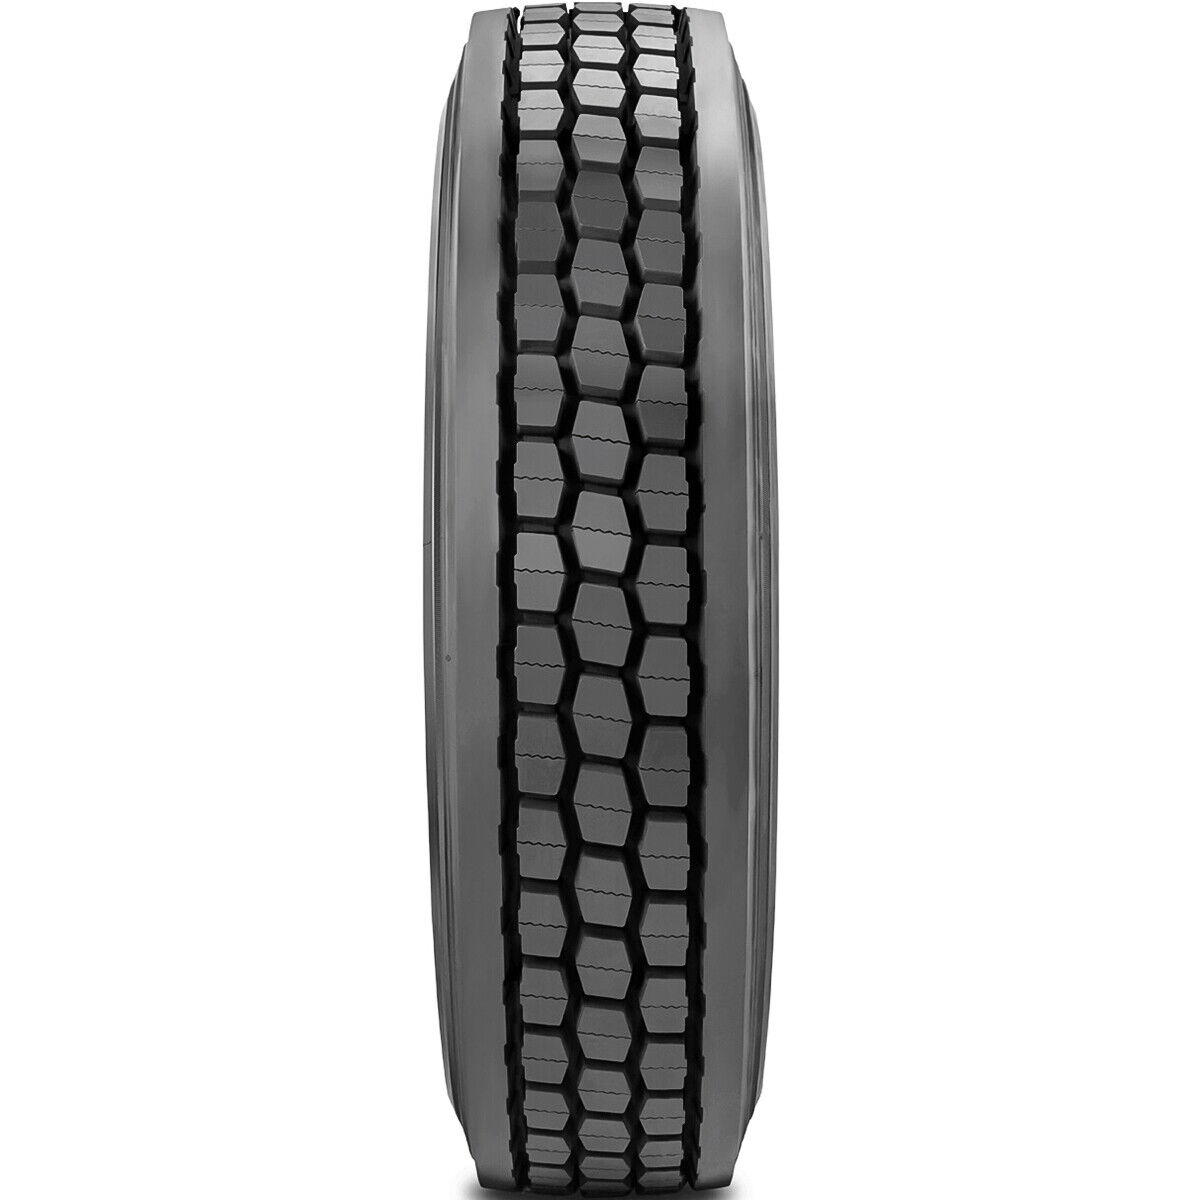 4 Tires Dynatrac DL380 11R24.5 Load G 14 Ply Drive Commercial